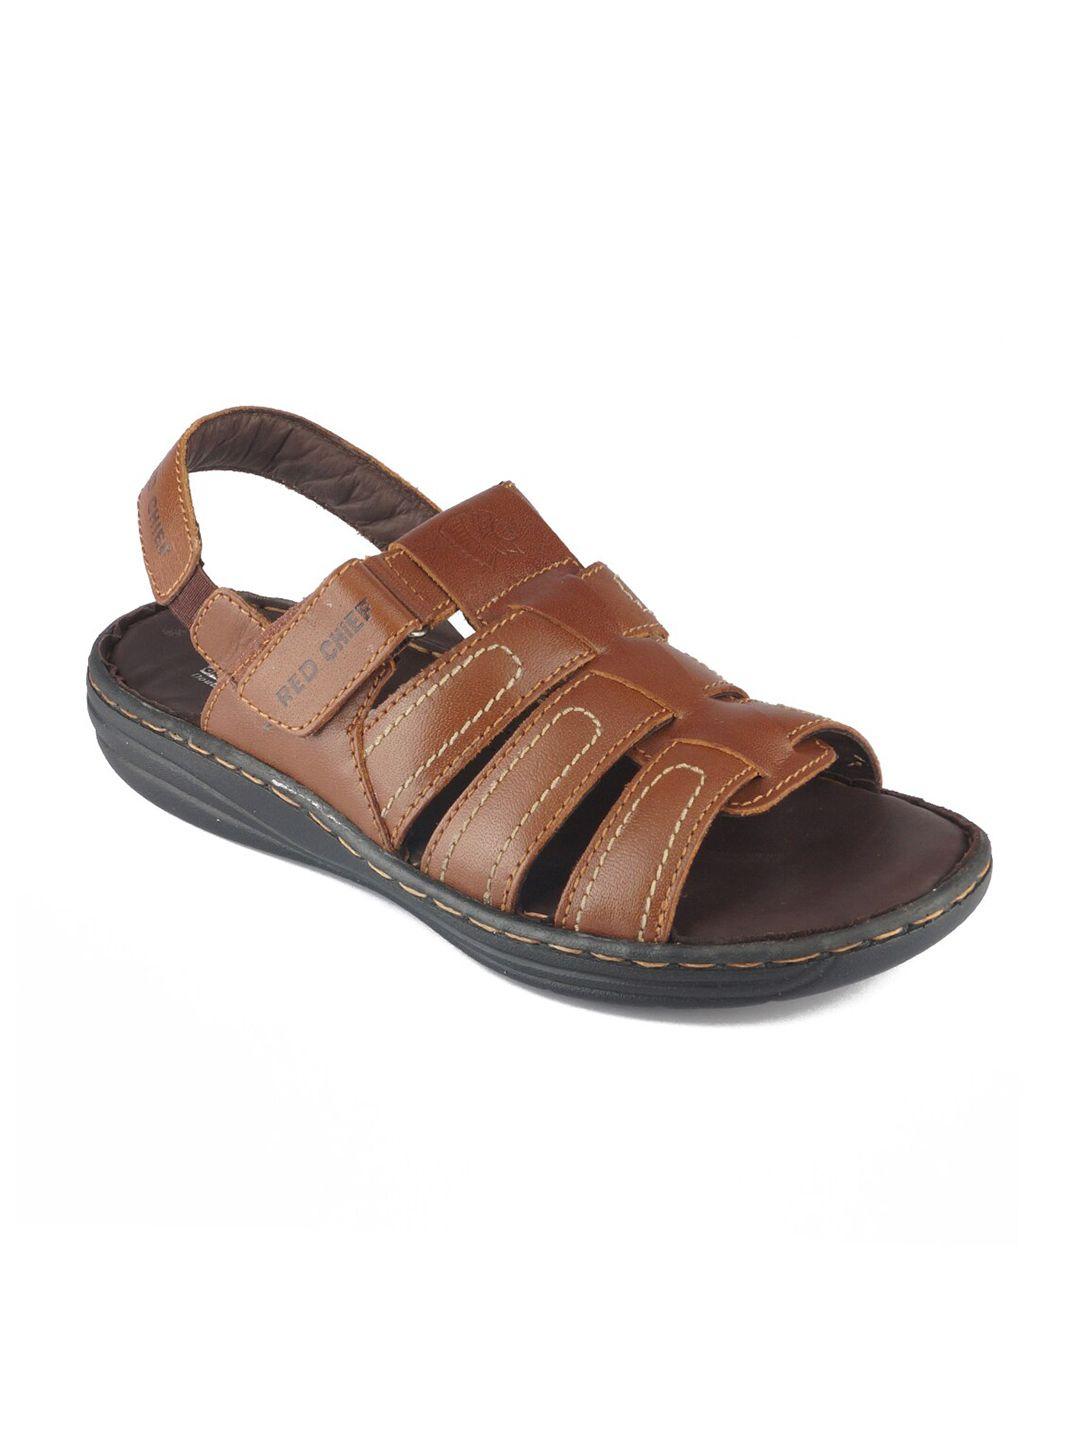 Red Chief Men Brown & Black Leather Comfort Sandals